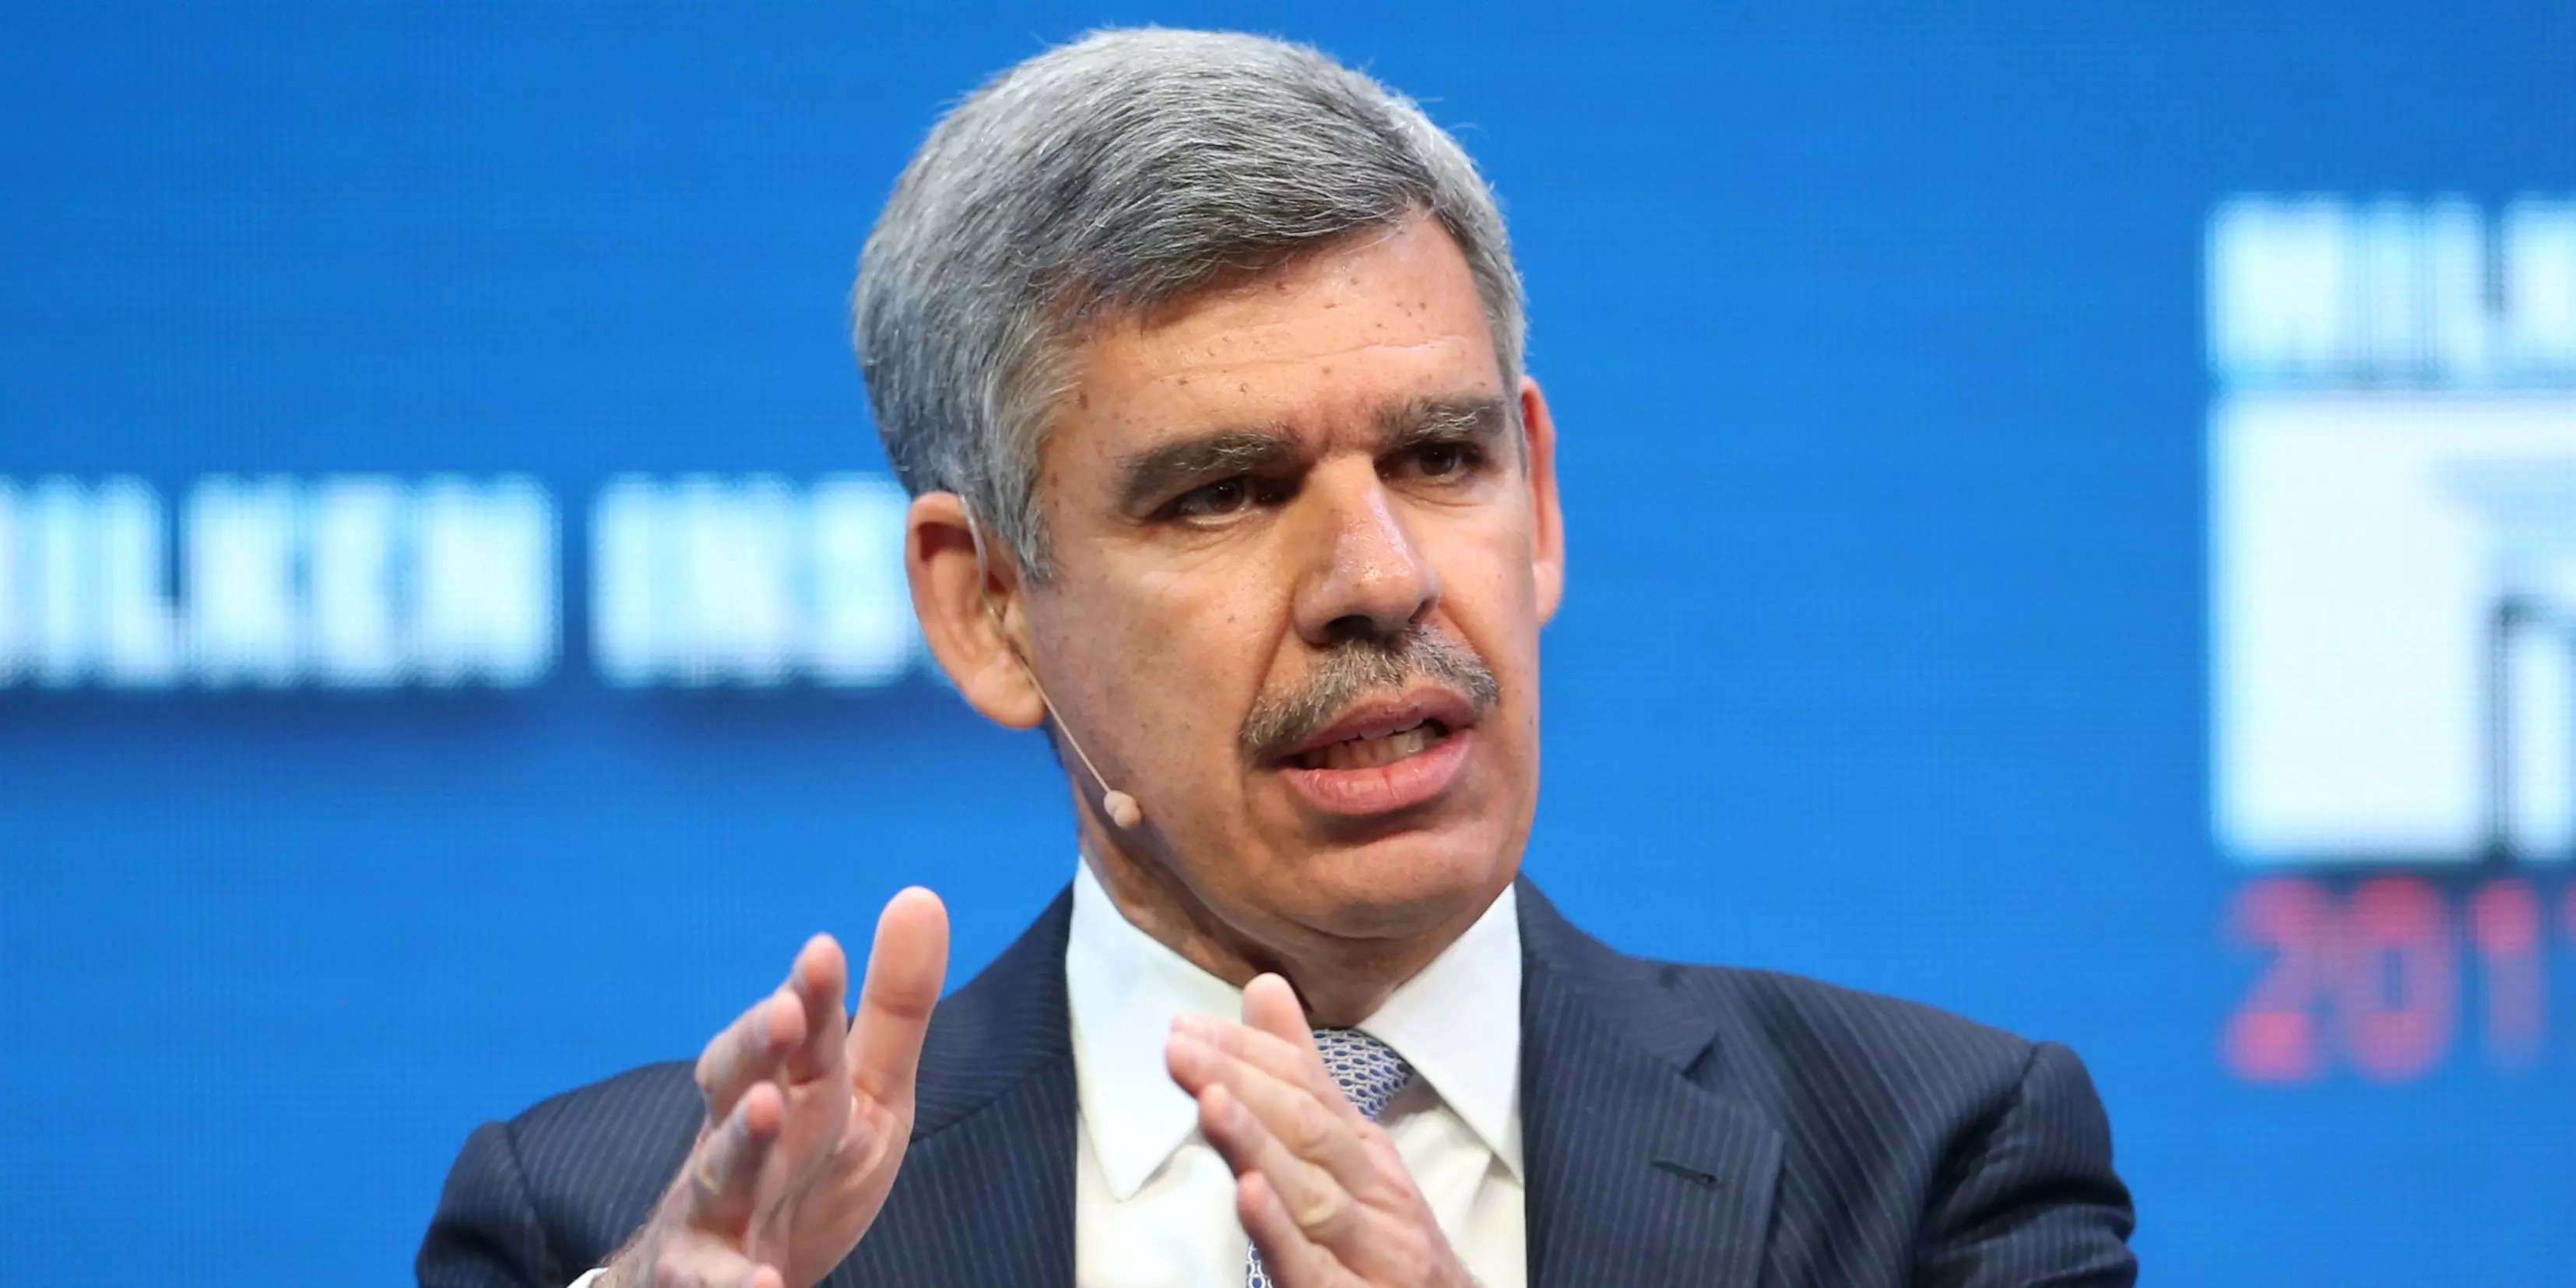 Mohamed El-Erian warned that the Fed’s rate hike may not suppress inflation — but it could still tank the U.S. economy and labor market.